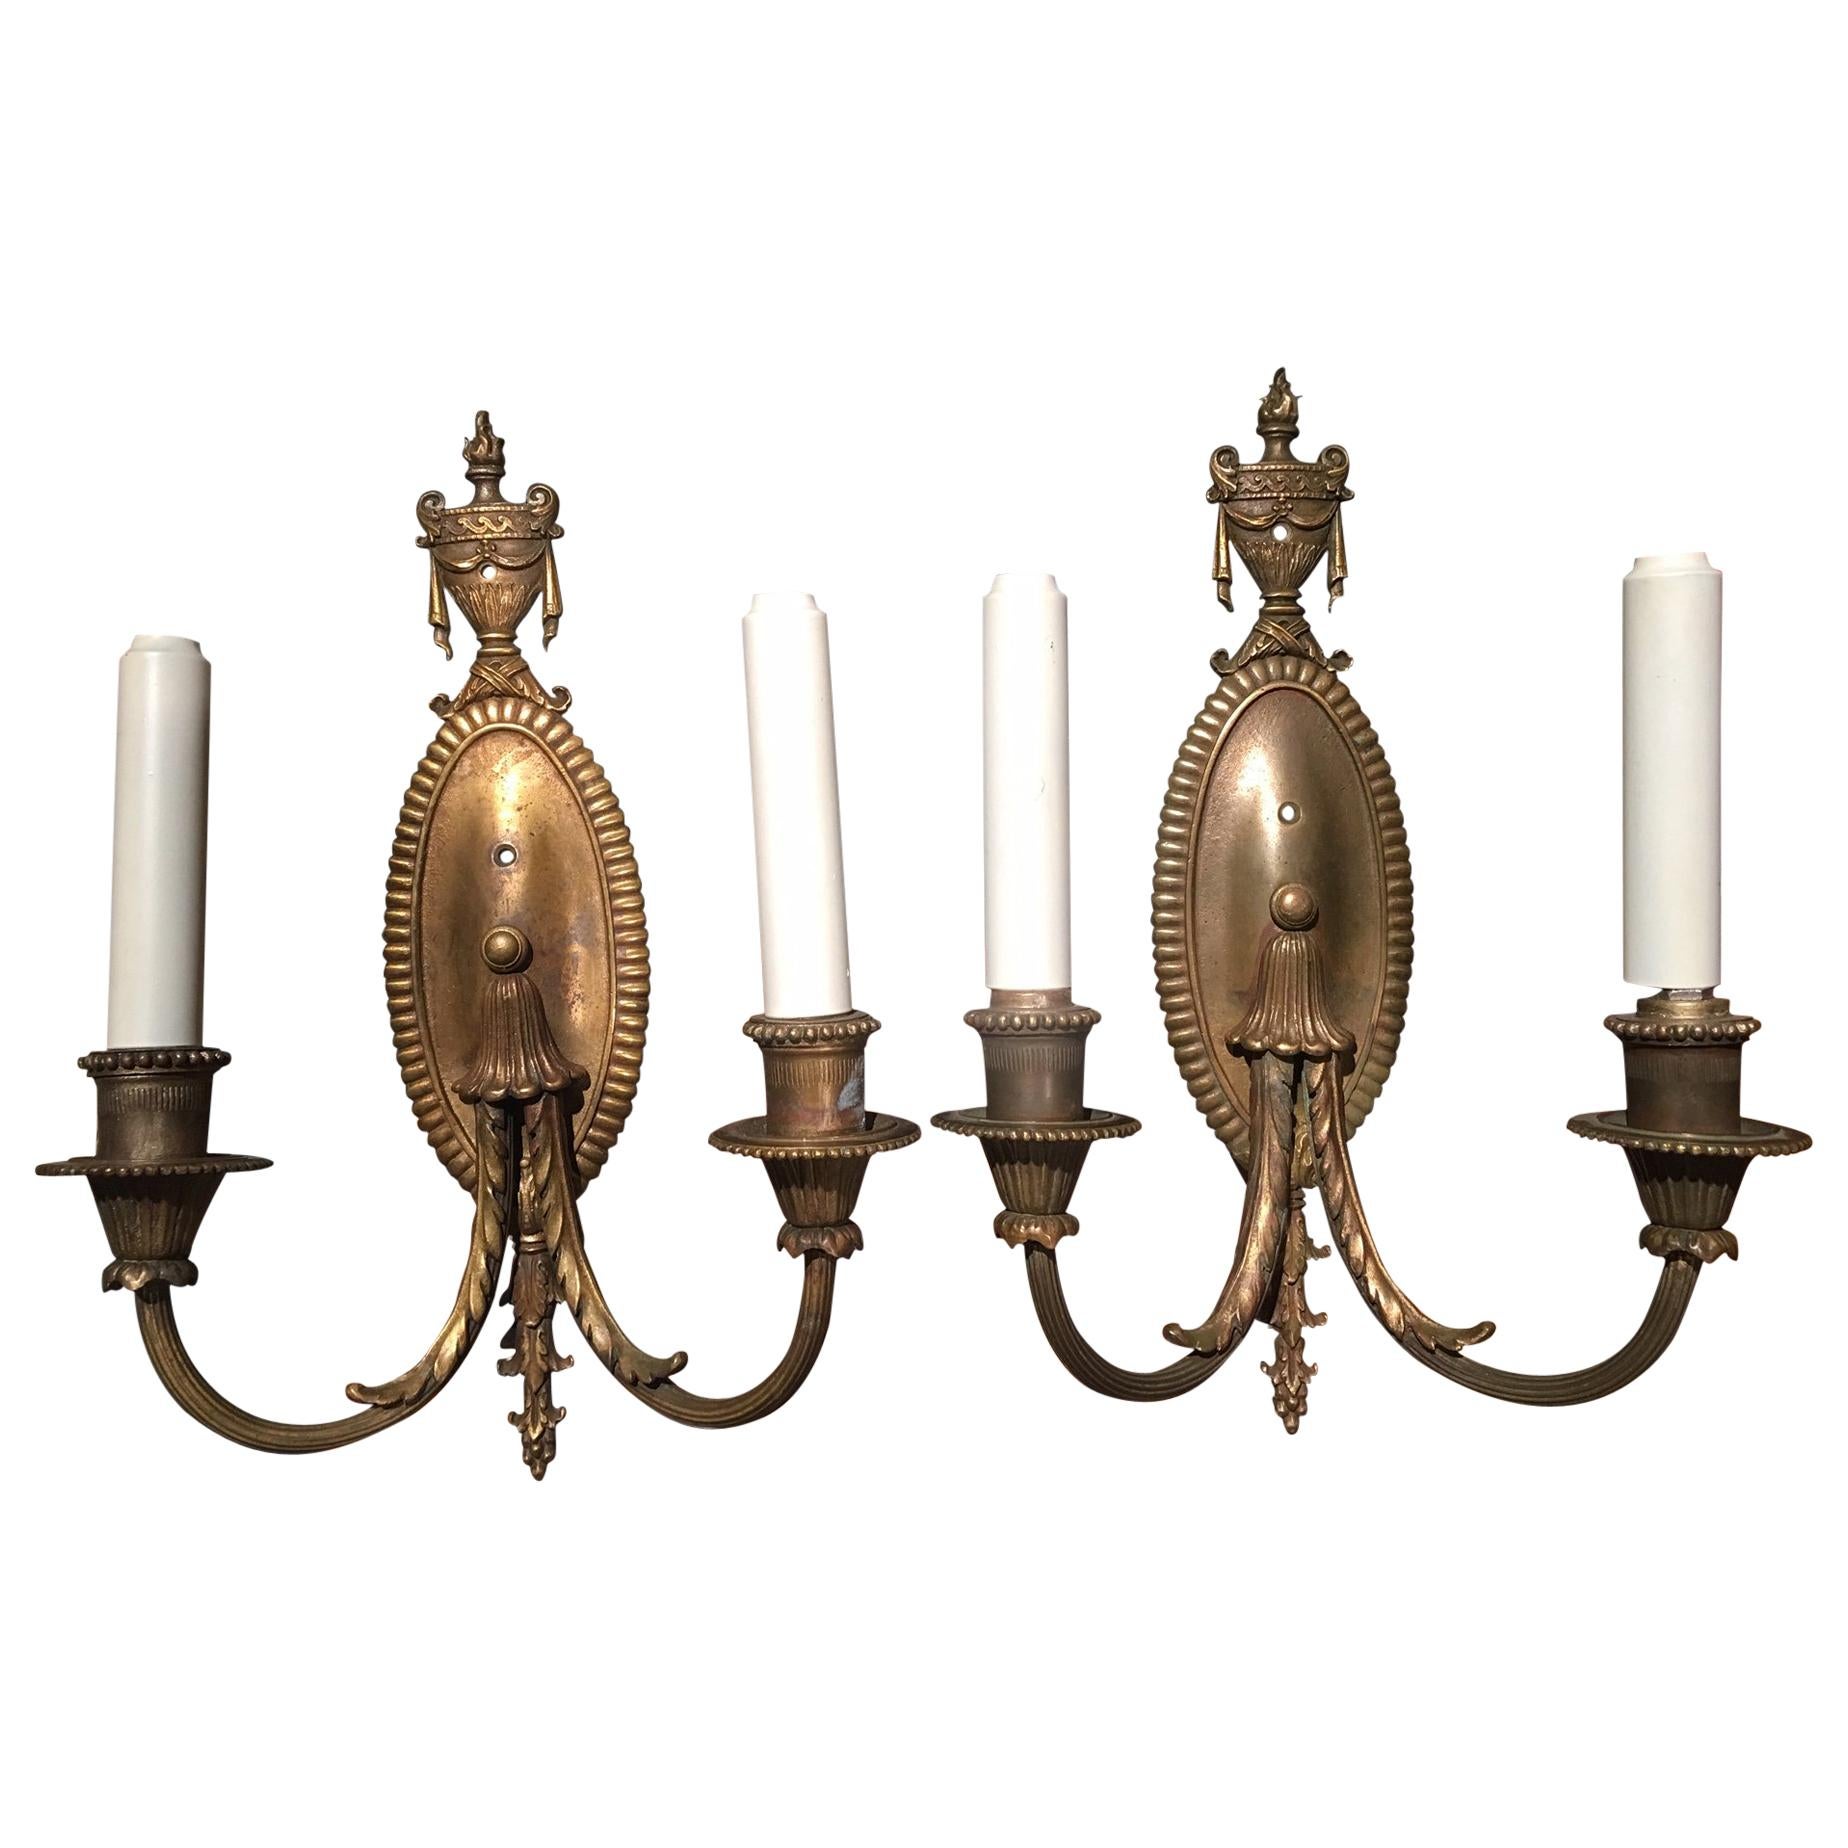 Pair of Brass Two-Light Oval Back with Urn Top Sconces, Late 19th Century